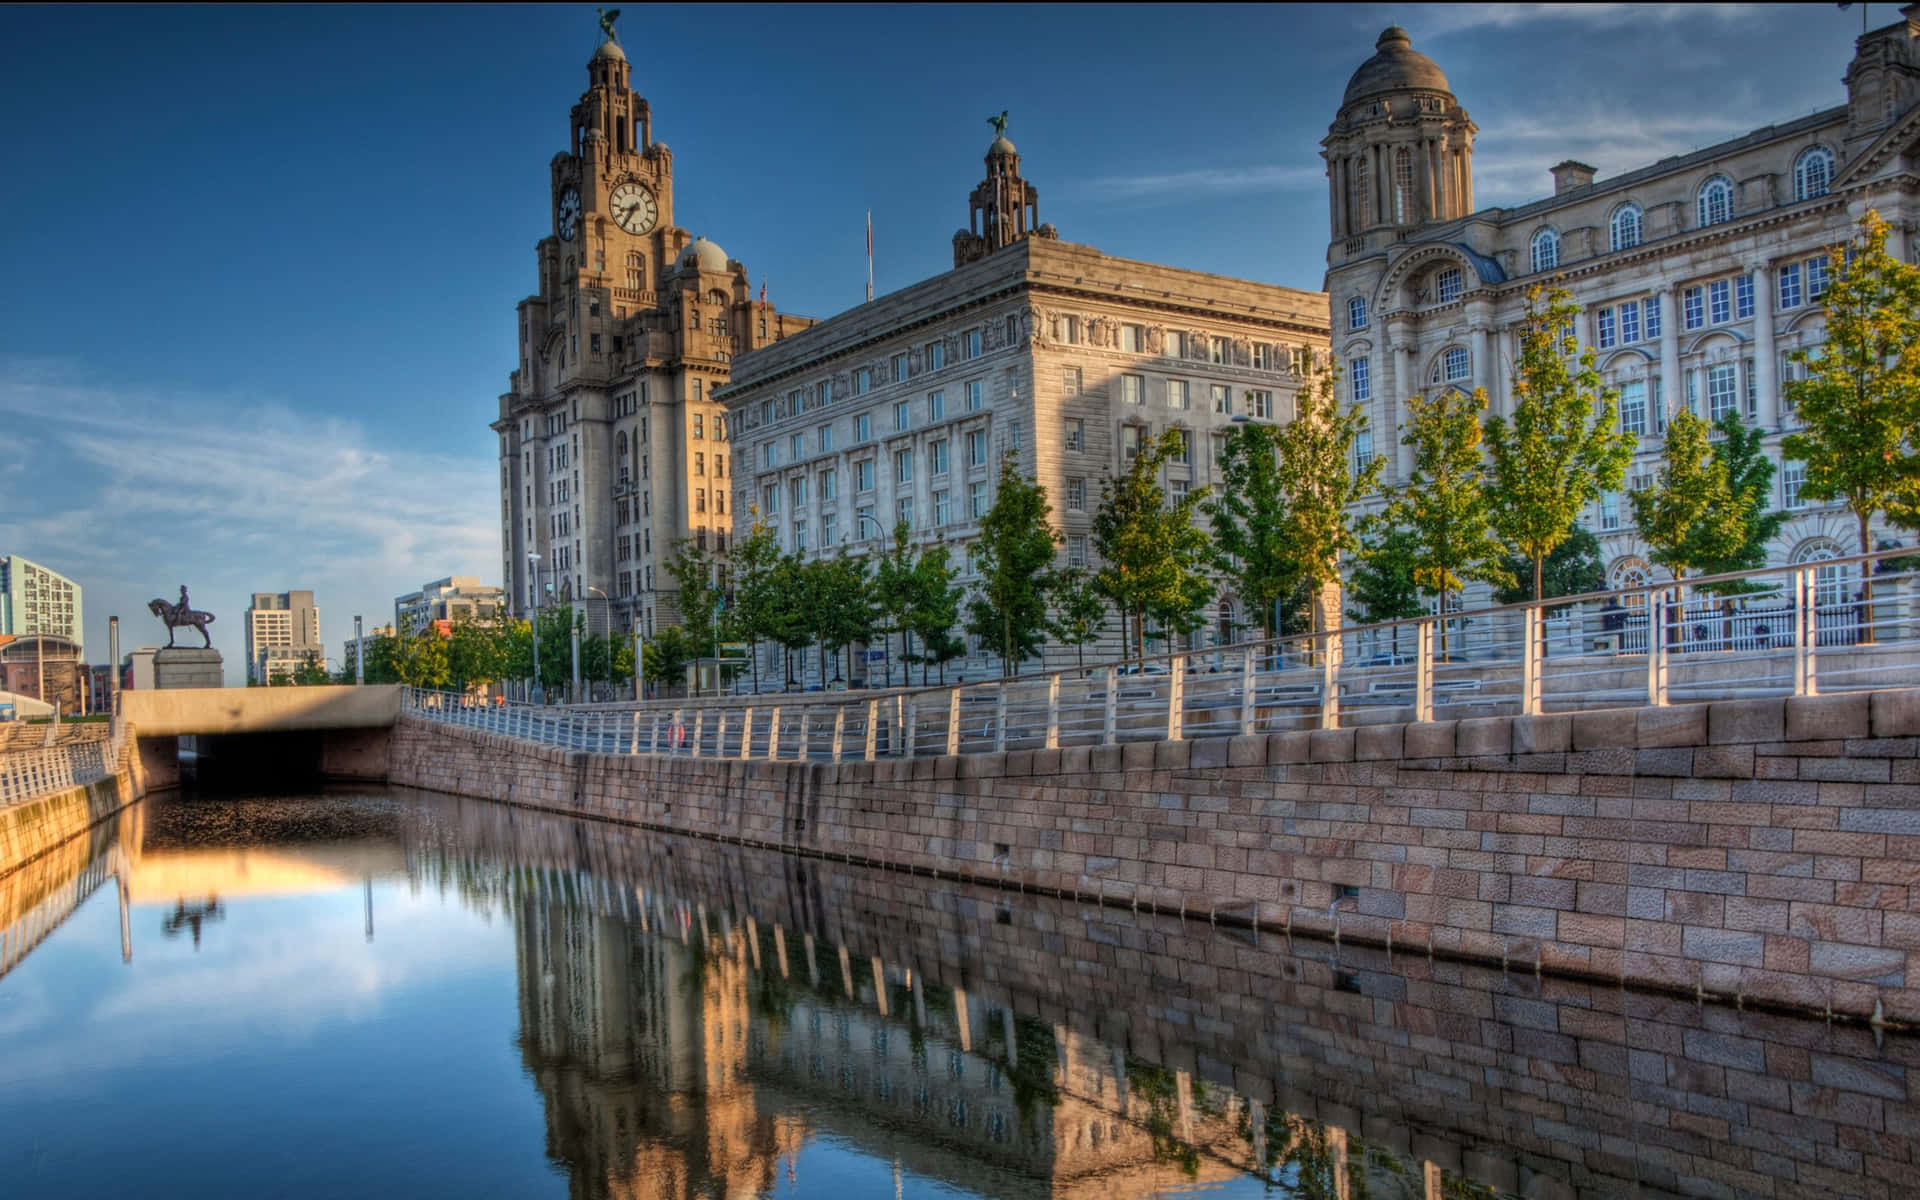 Enjoy the peaceful views of Liverpool